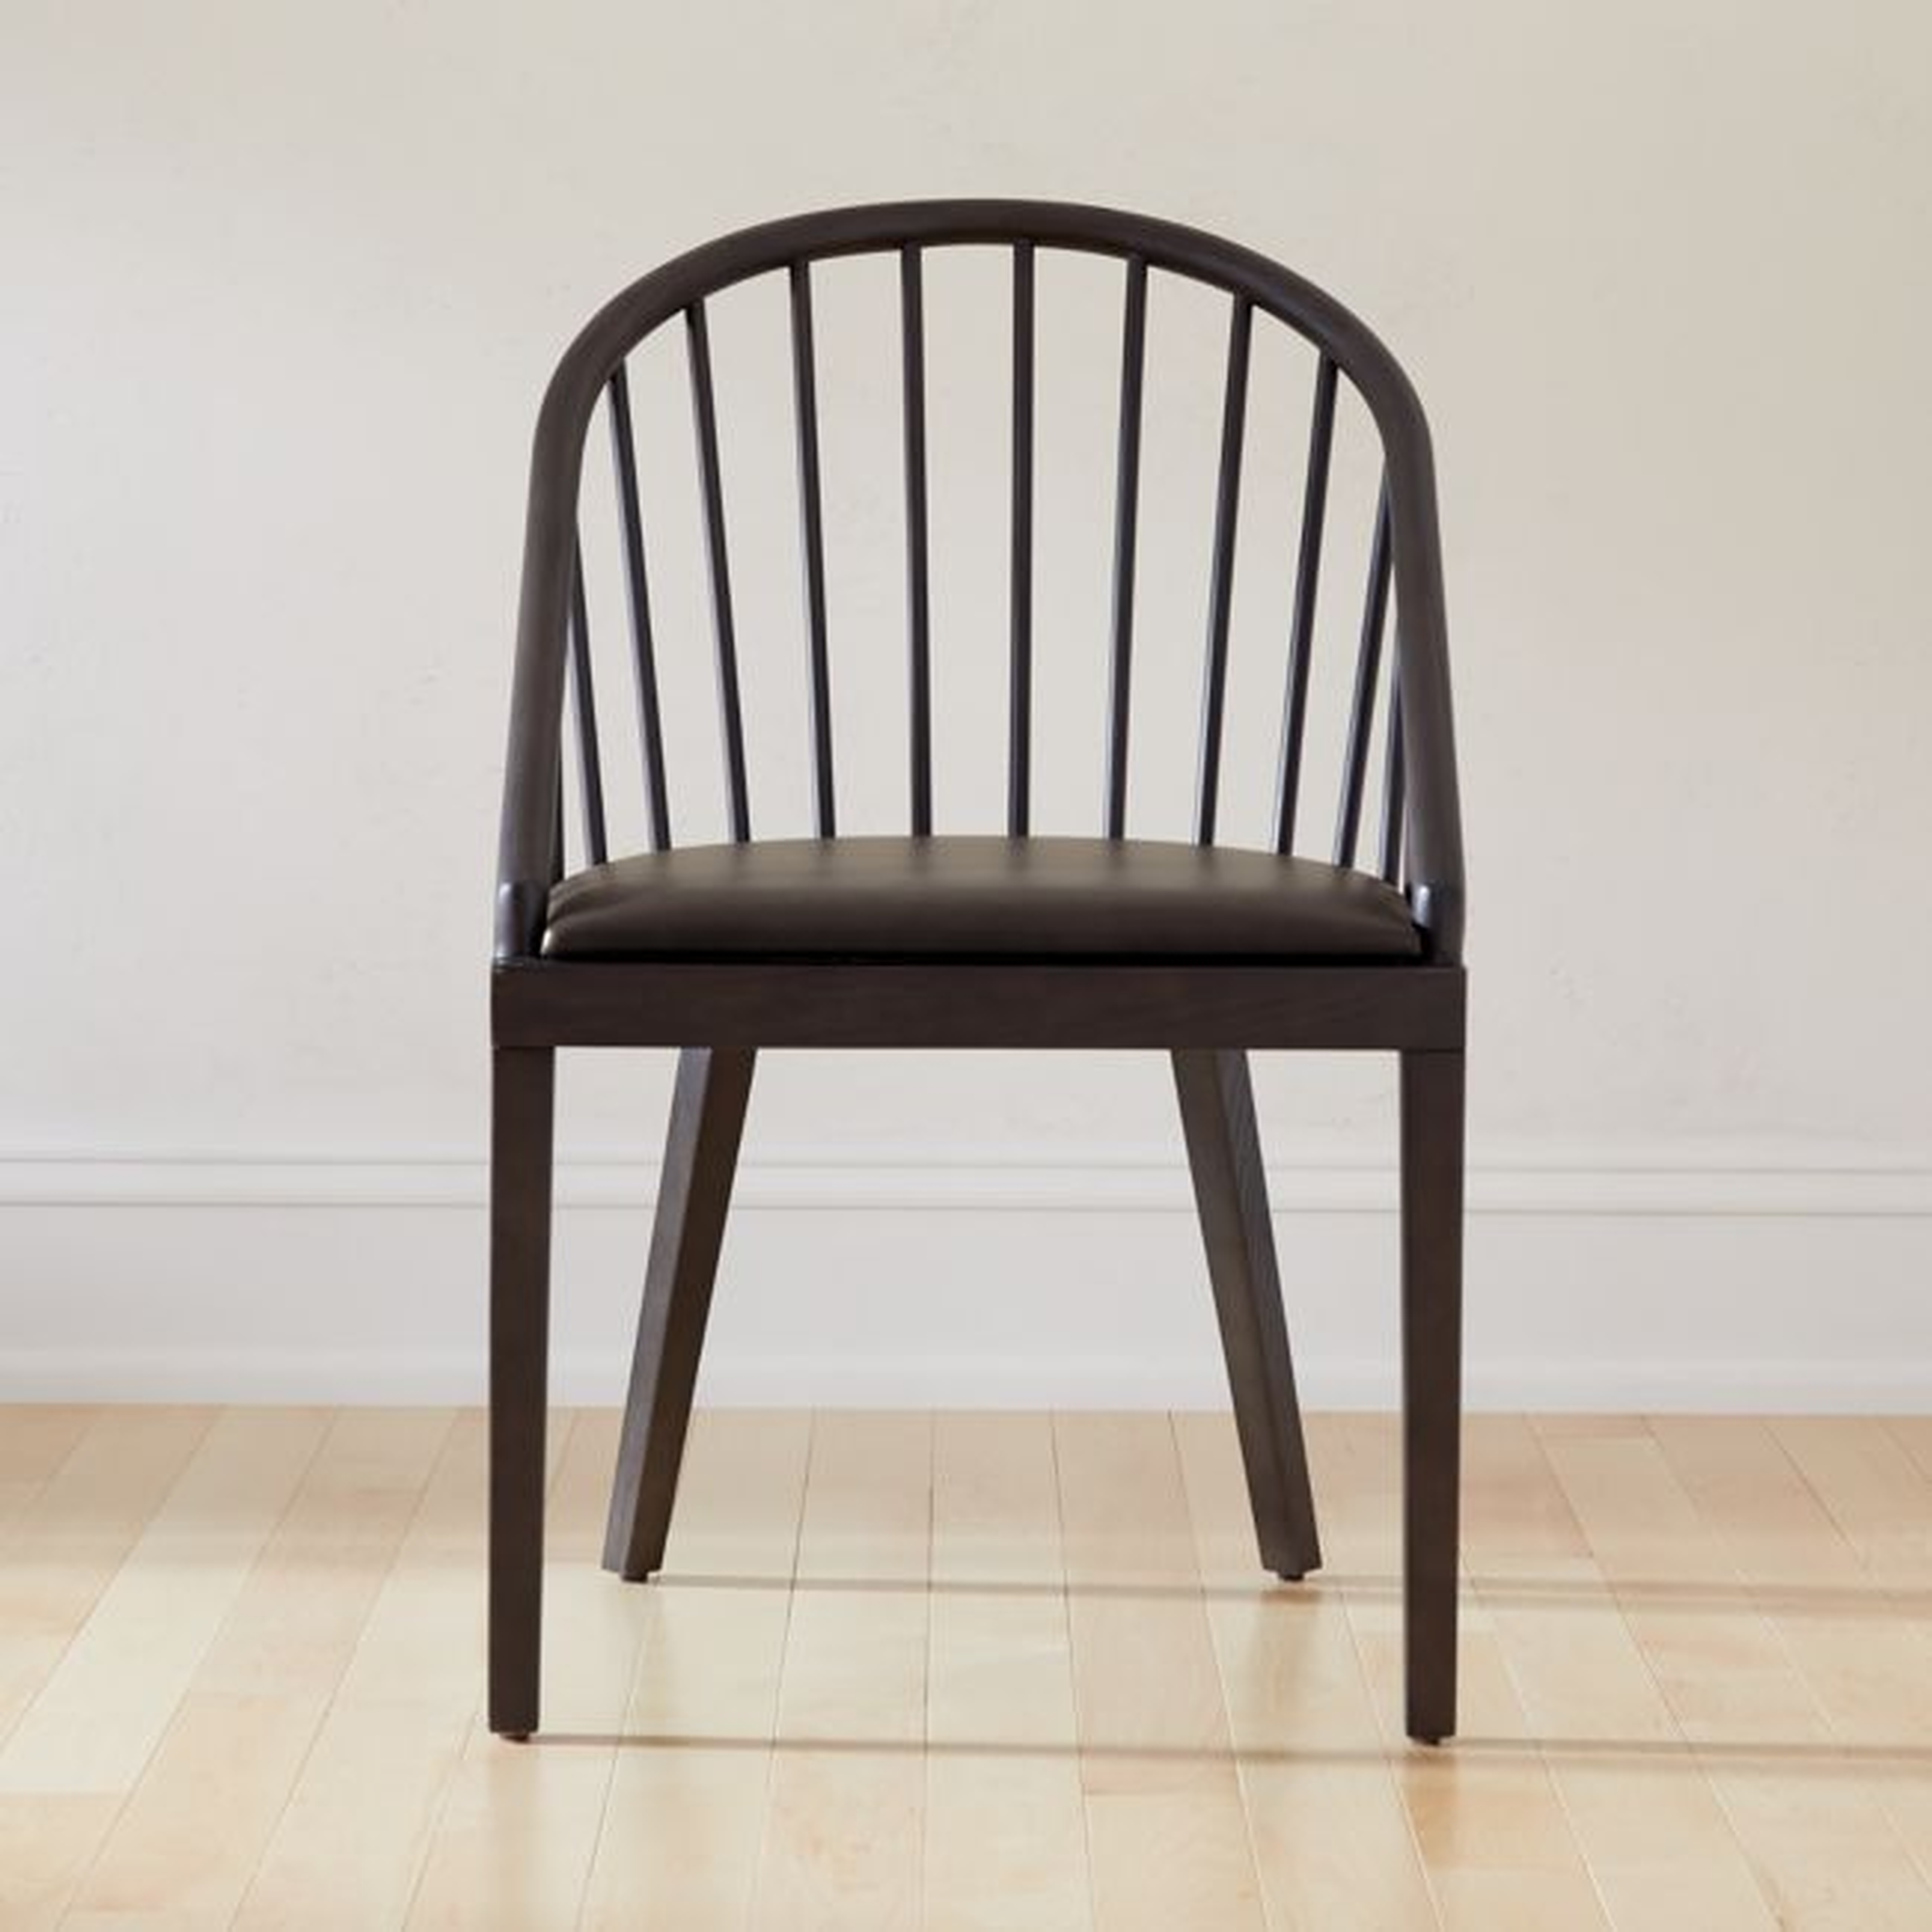 Comb Blackened Wood Dining Chair - CB2